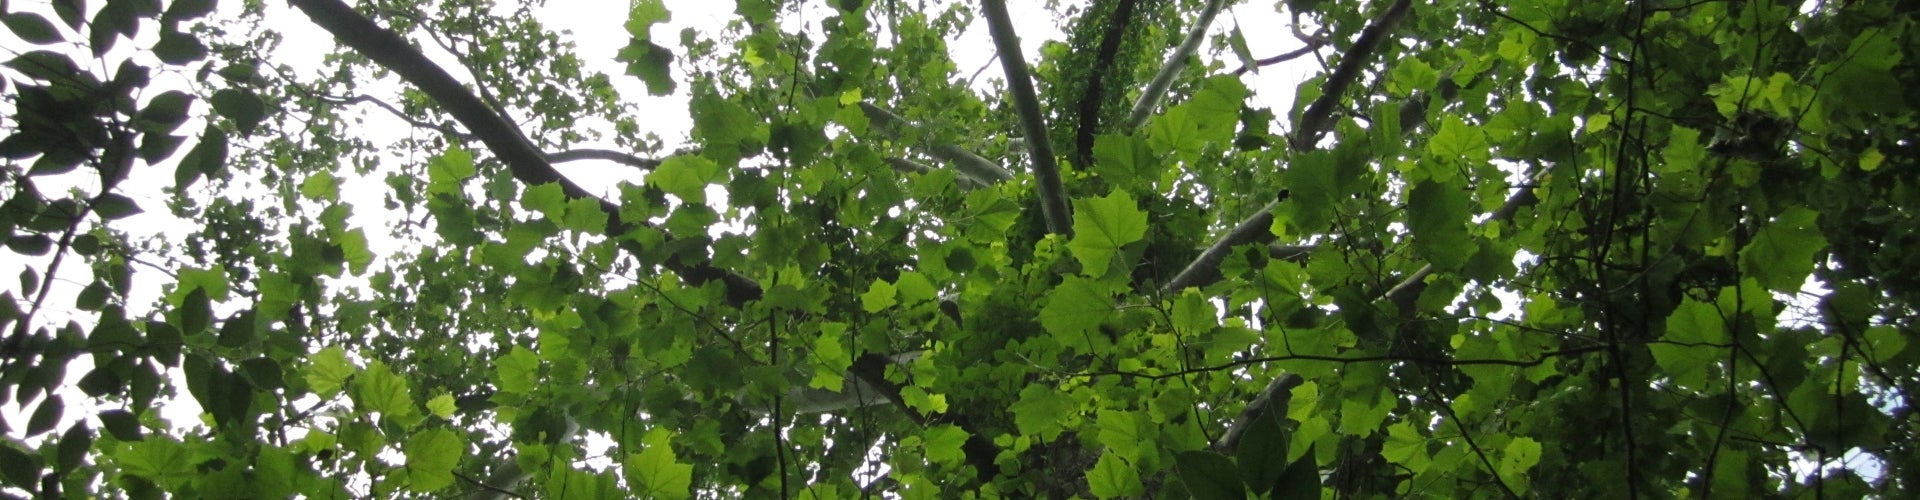 Cathedral Sycamore tree leaves